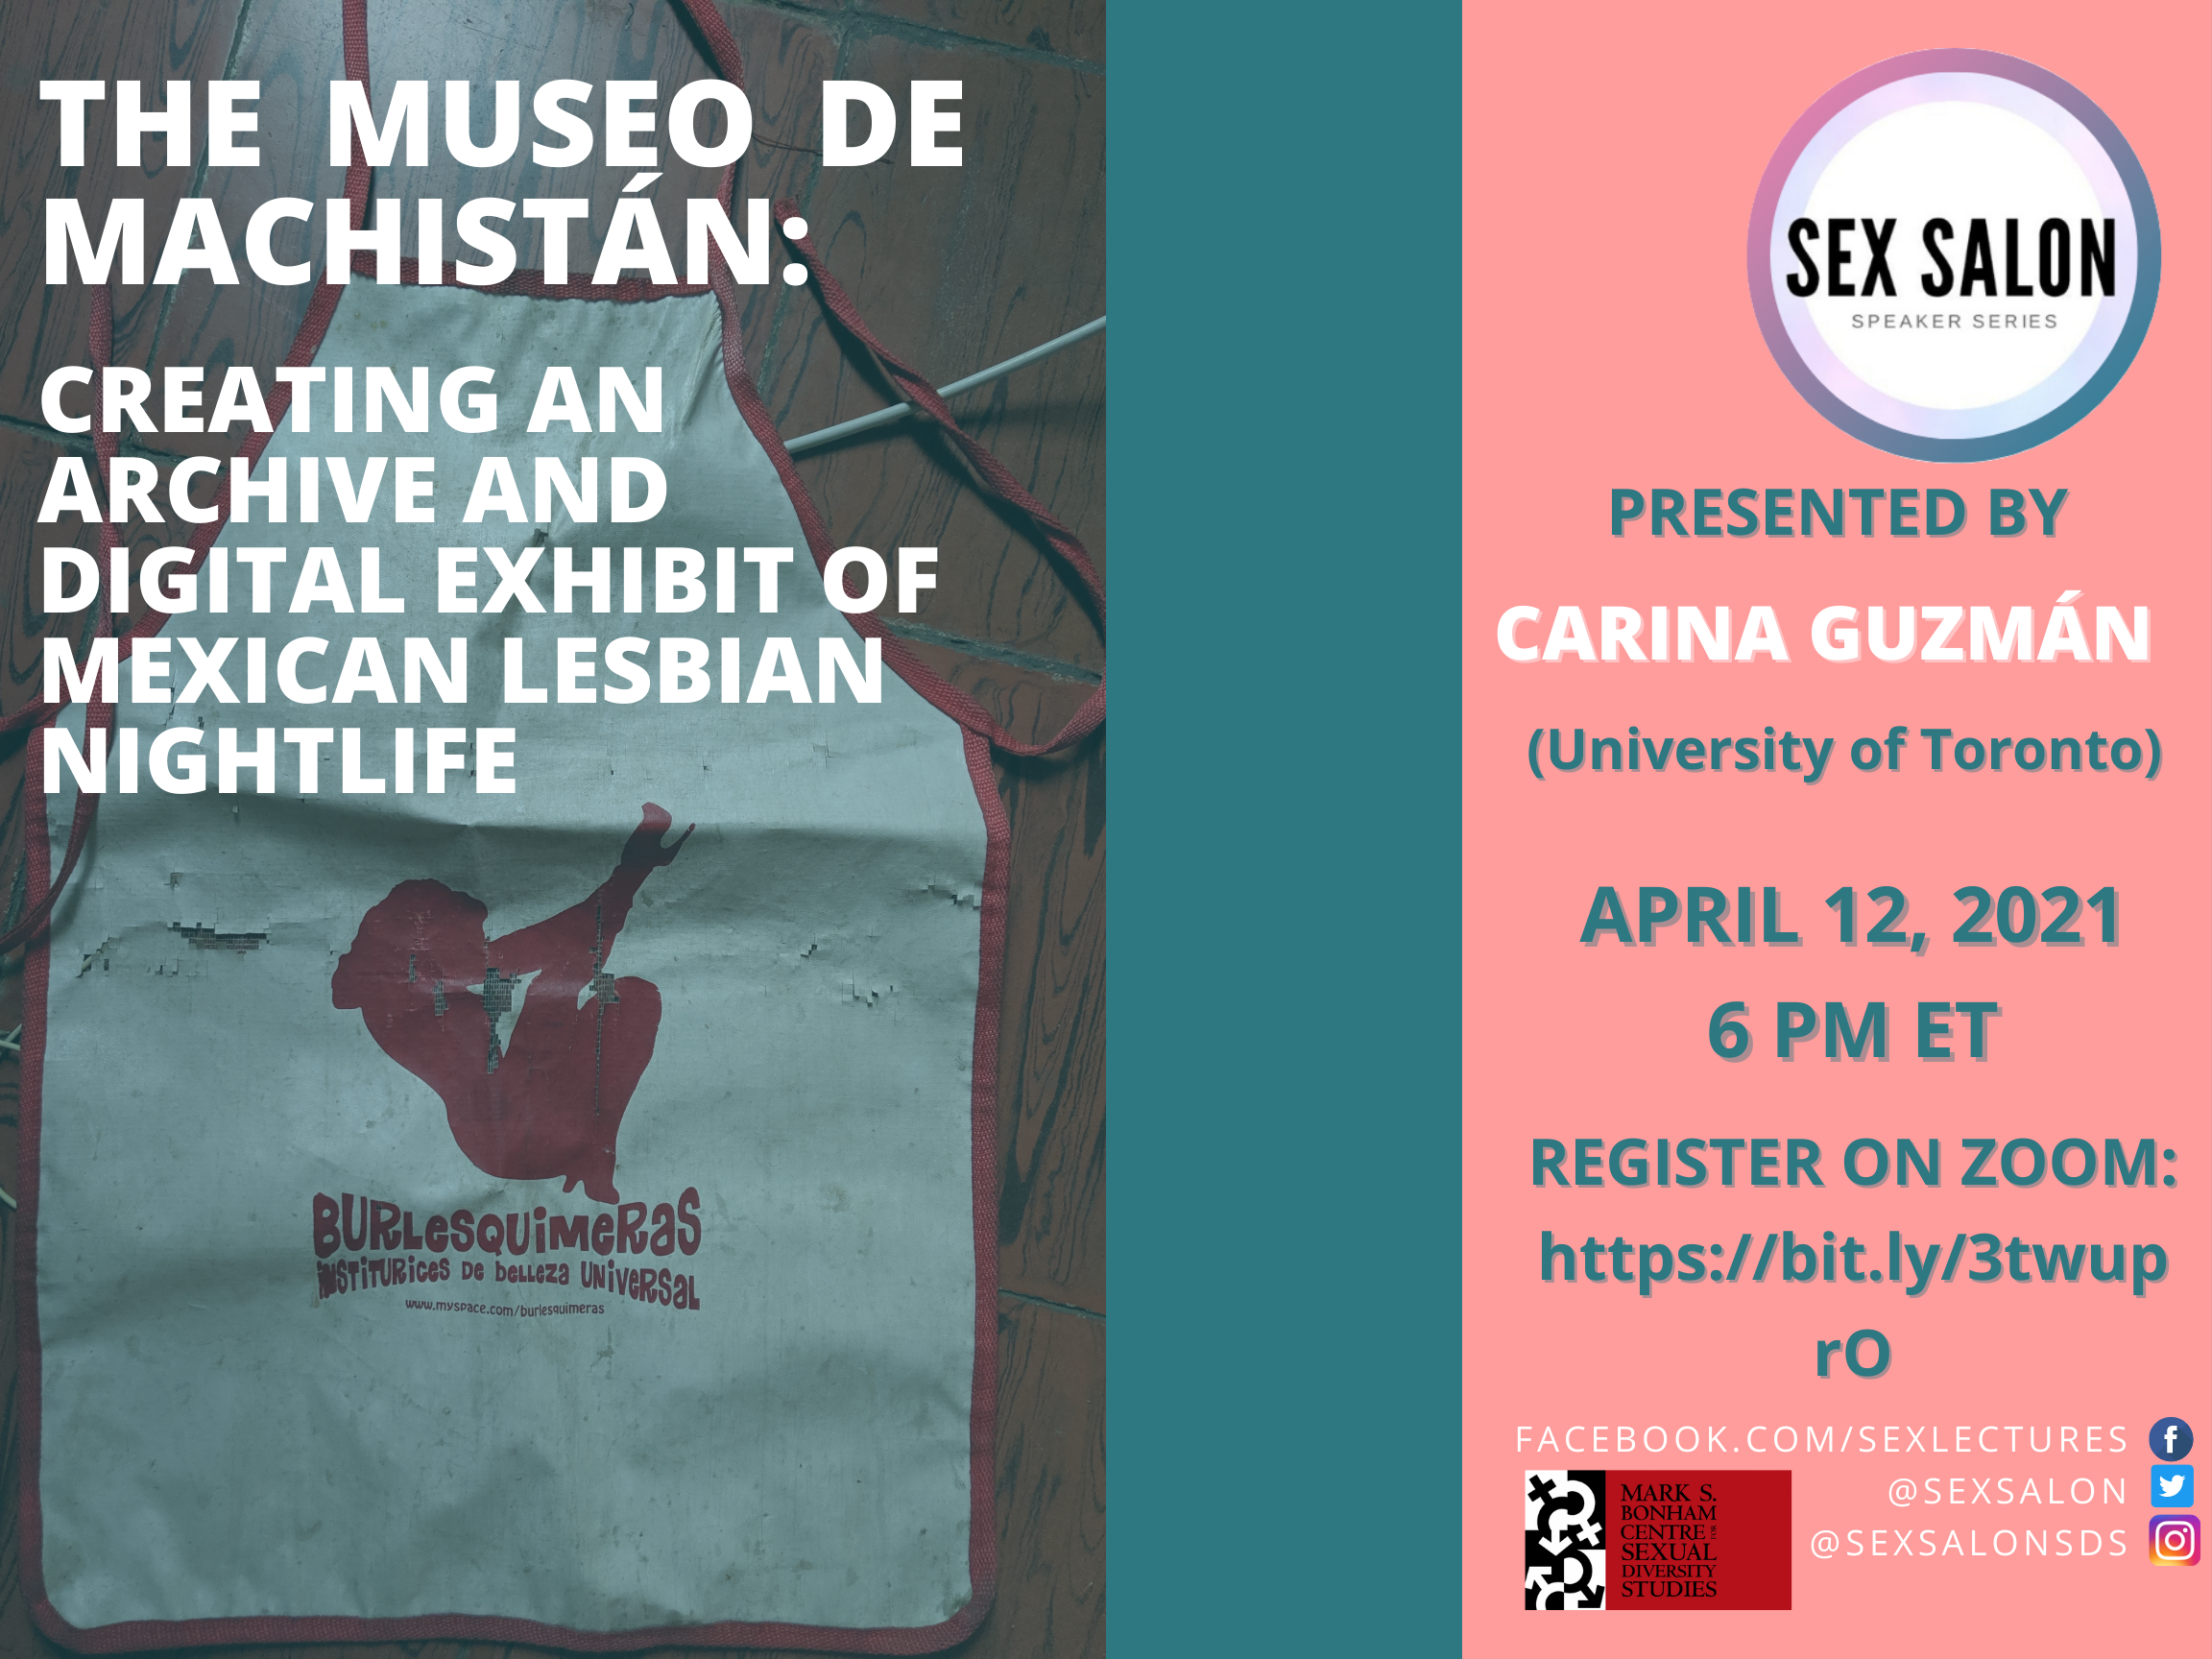 Sex Salon: The Museo de Machistán: Creating an Archive and Digital Exhibit of Mexican Lesbian Nightlife